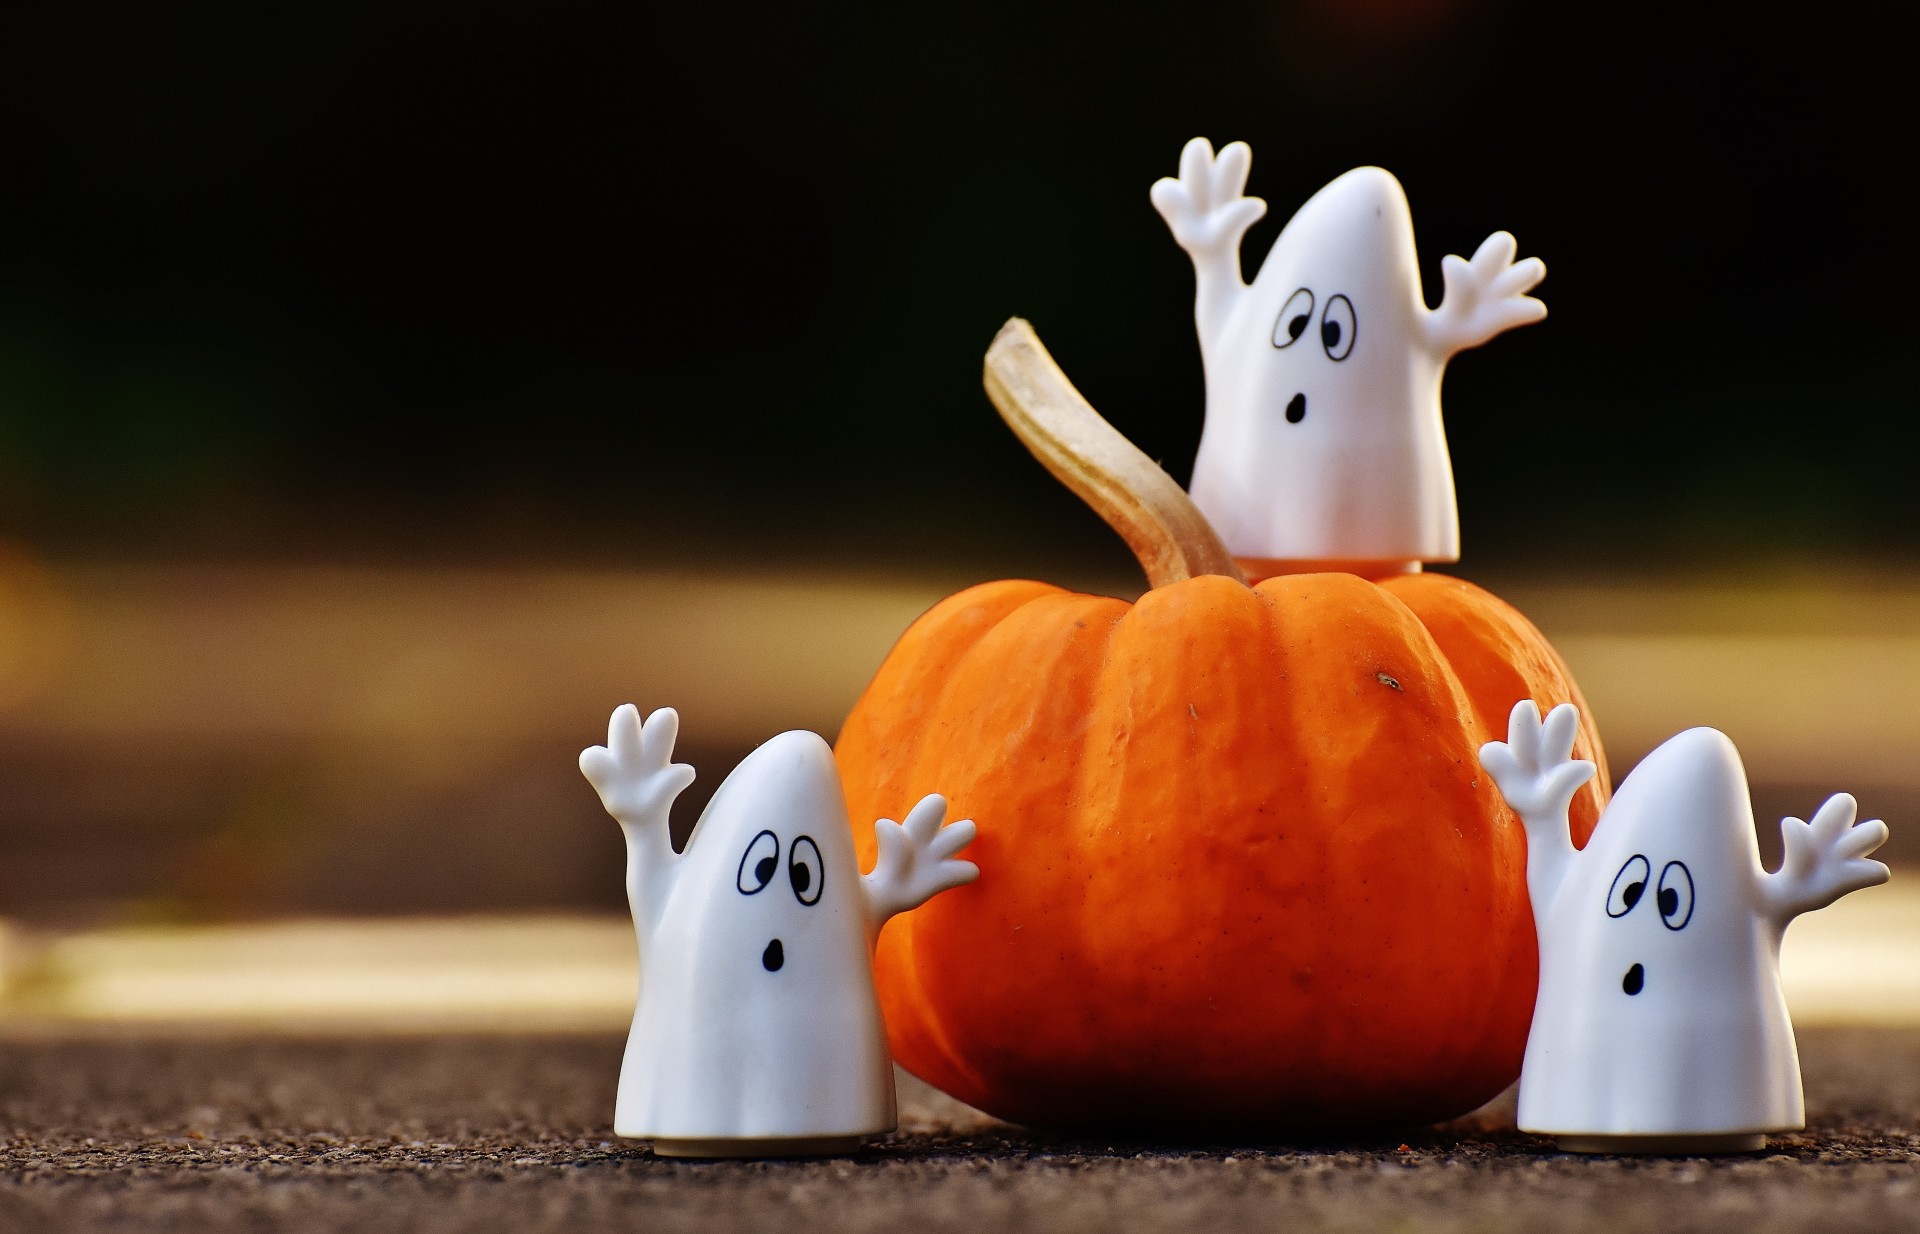 Photo of pumpkin and three ghost figurines.